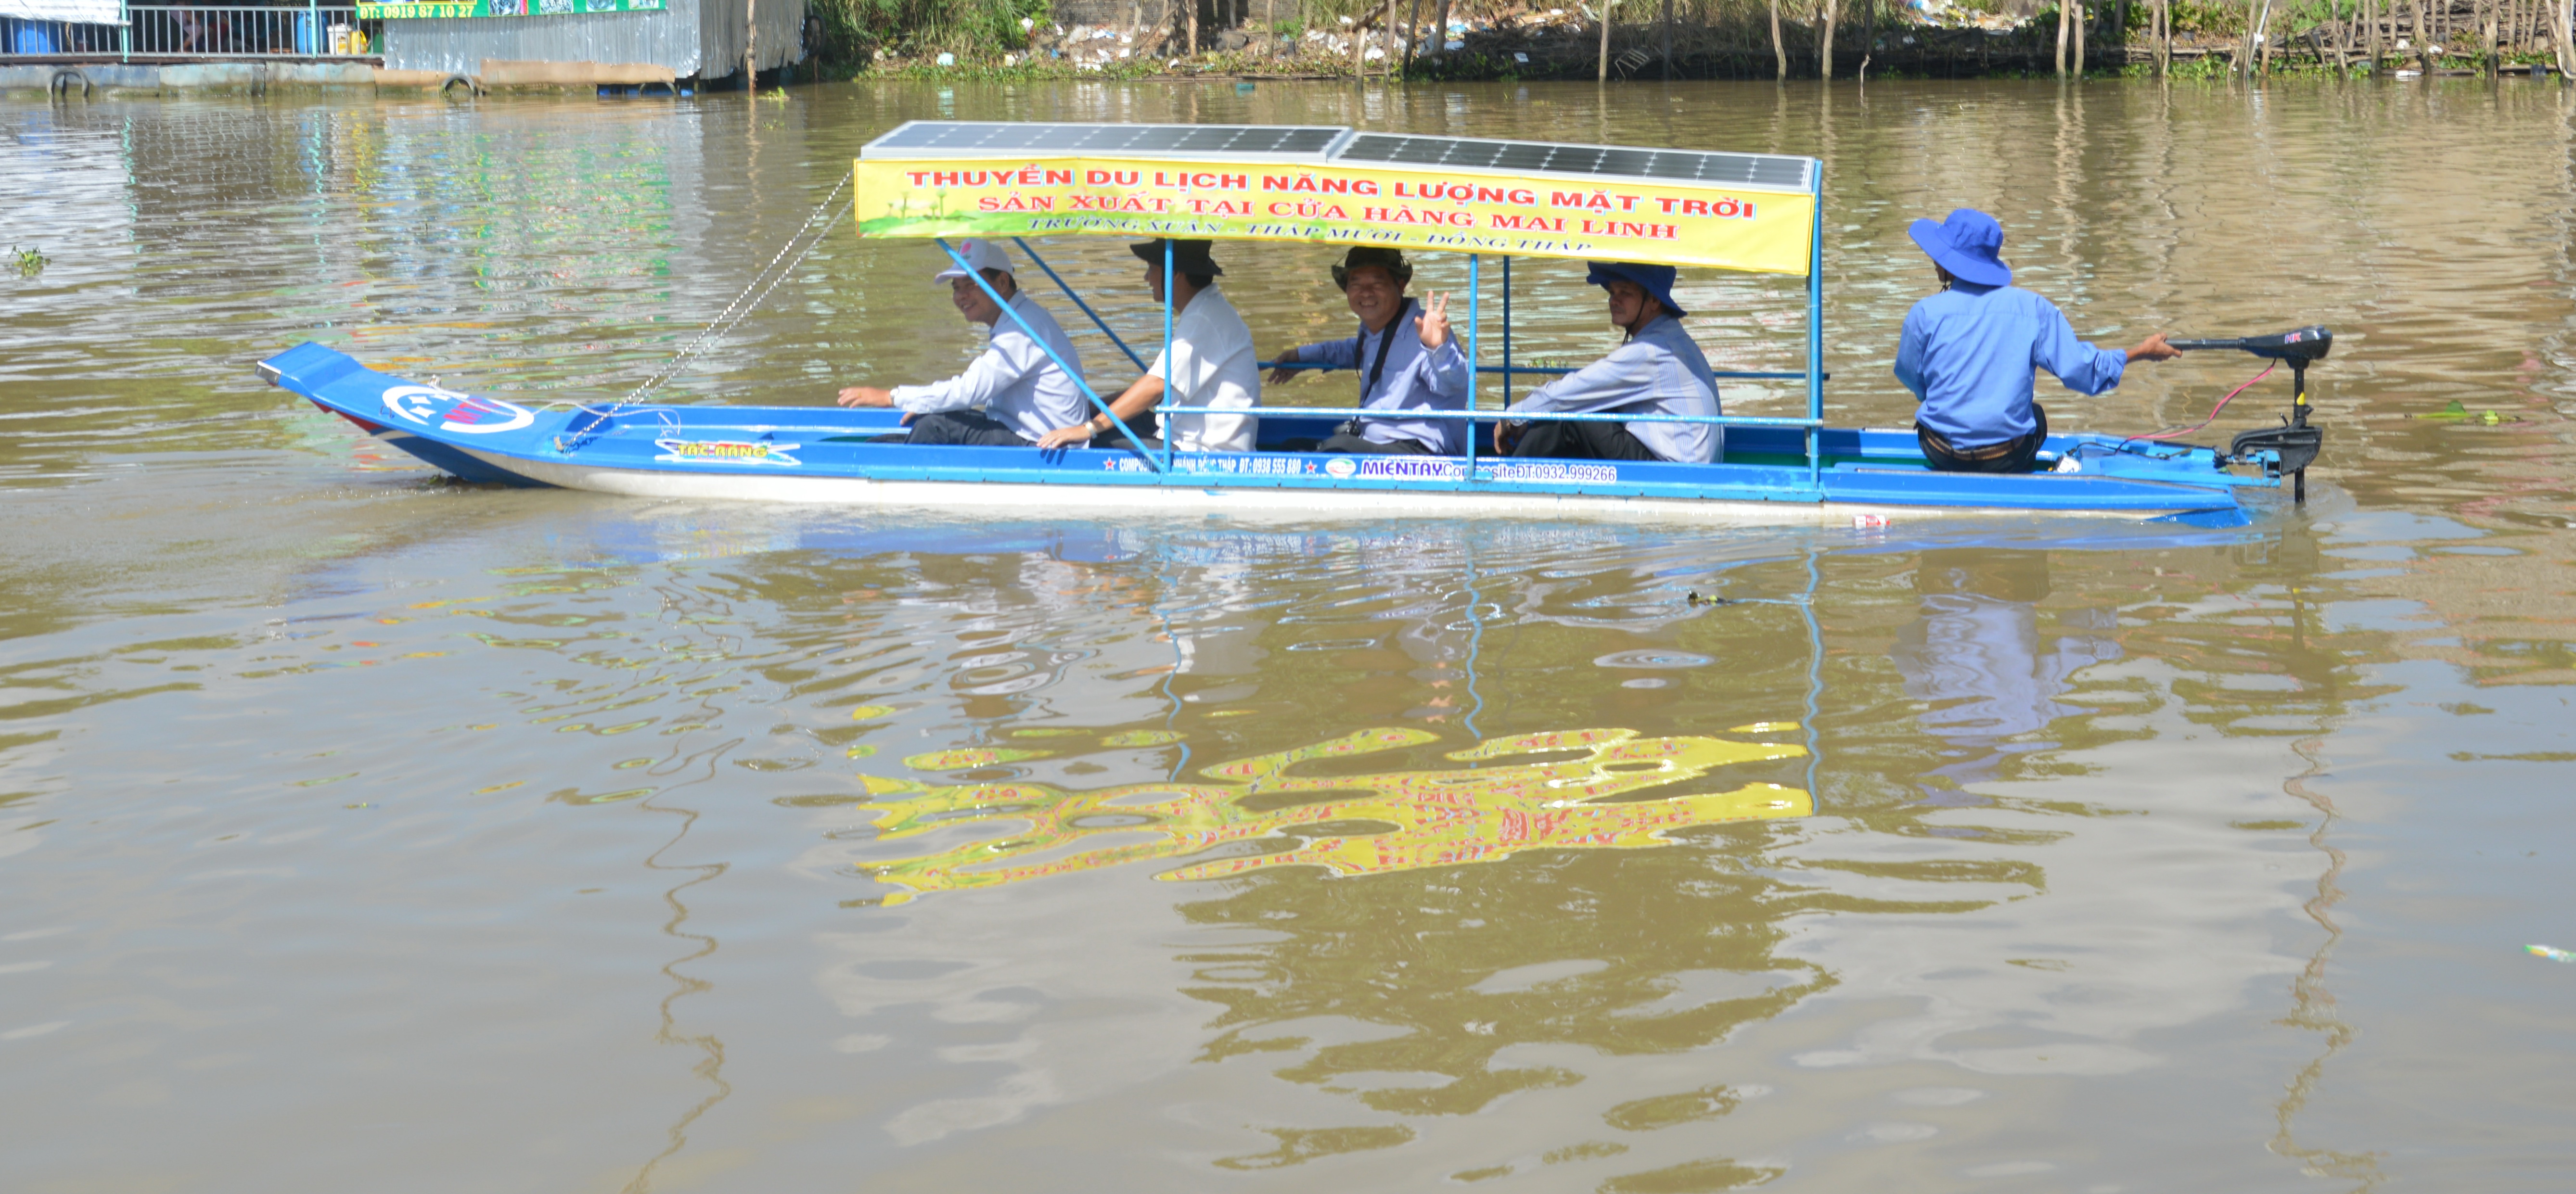 Solar-powered boats made by Vietnamese farmers to serve tourists in September